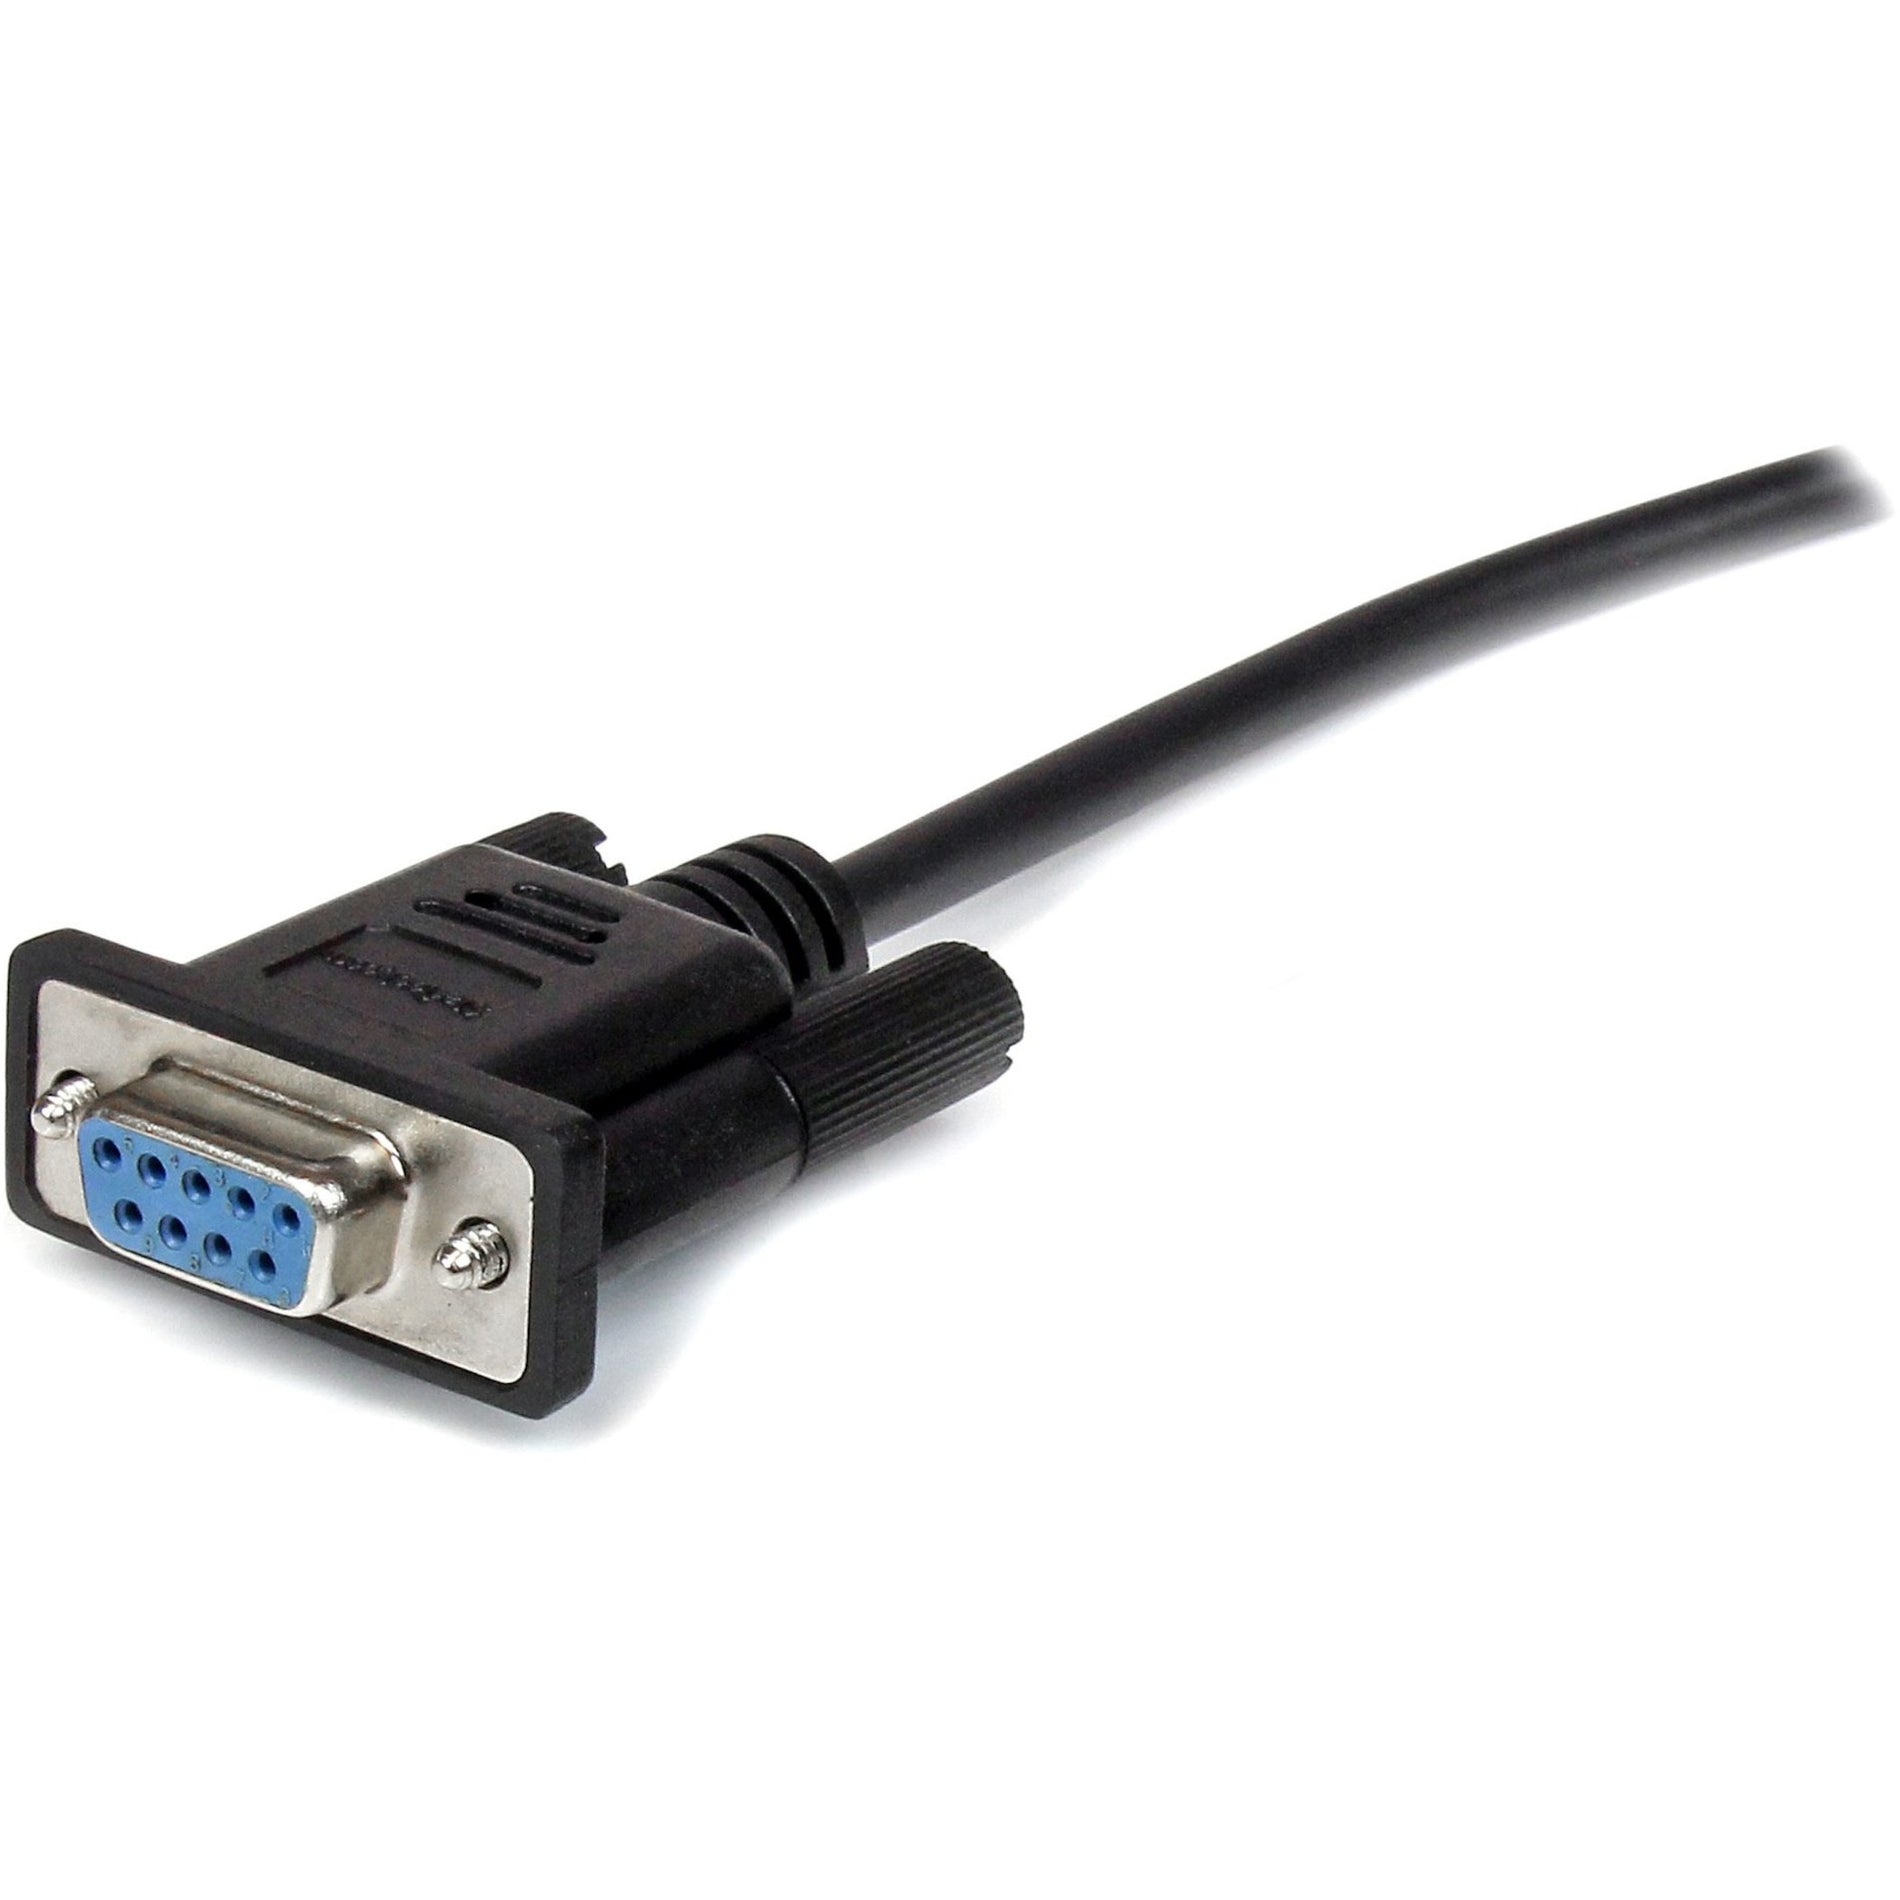 StarTech.com MXT1002MBK 2m Black Straight Through DB9 RS232 Serial Cable - M/F, Molded, Copper Conductor, Shielded